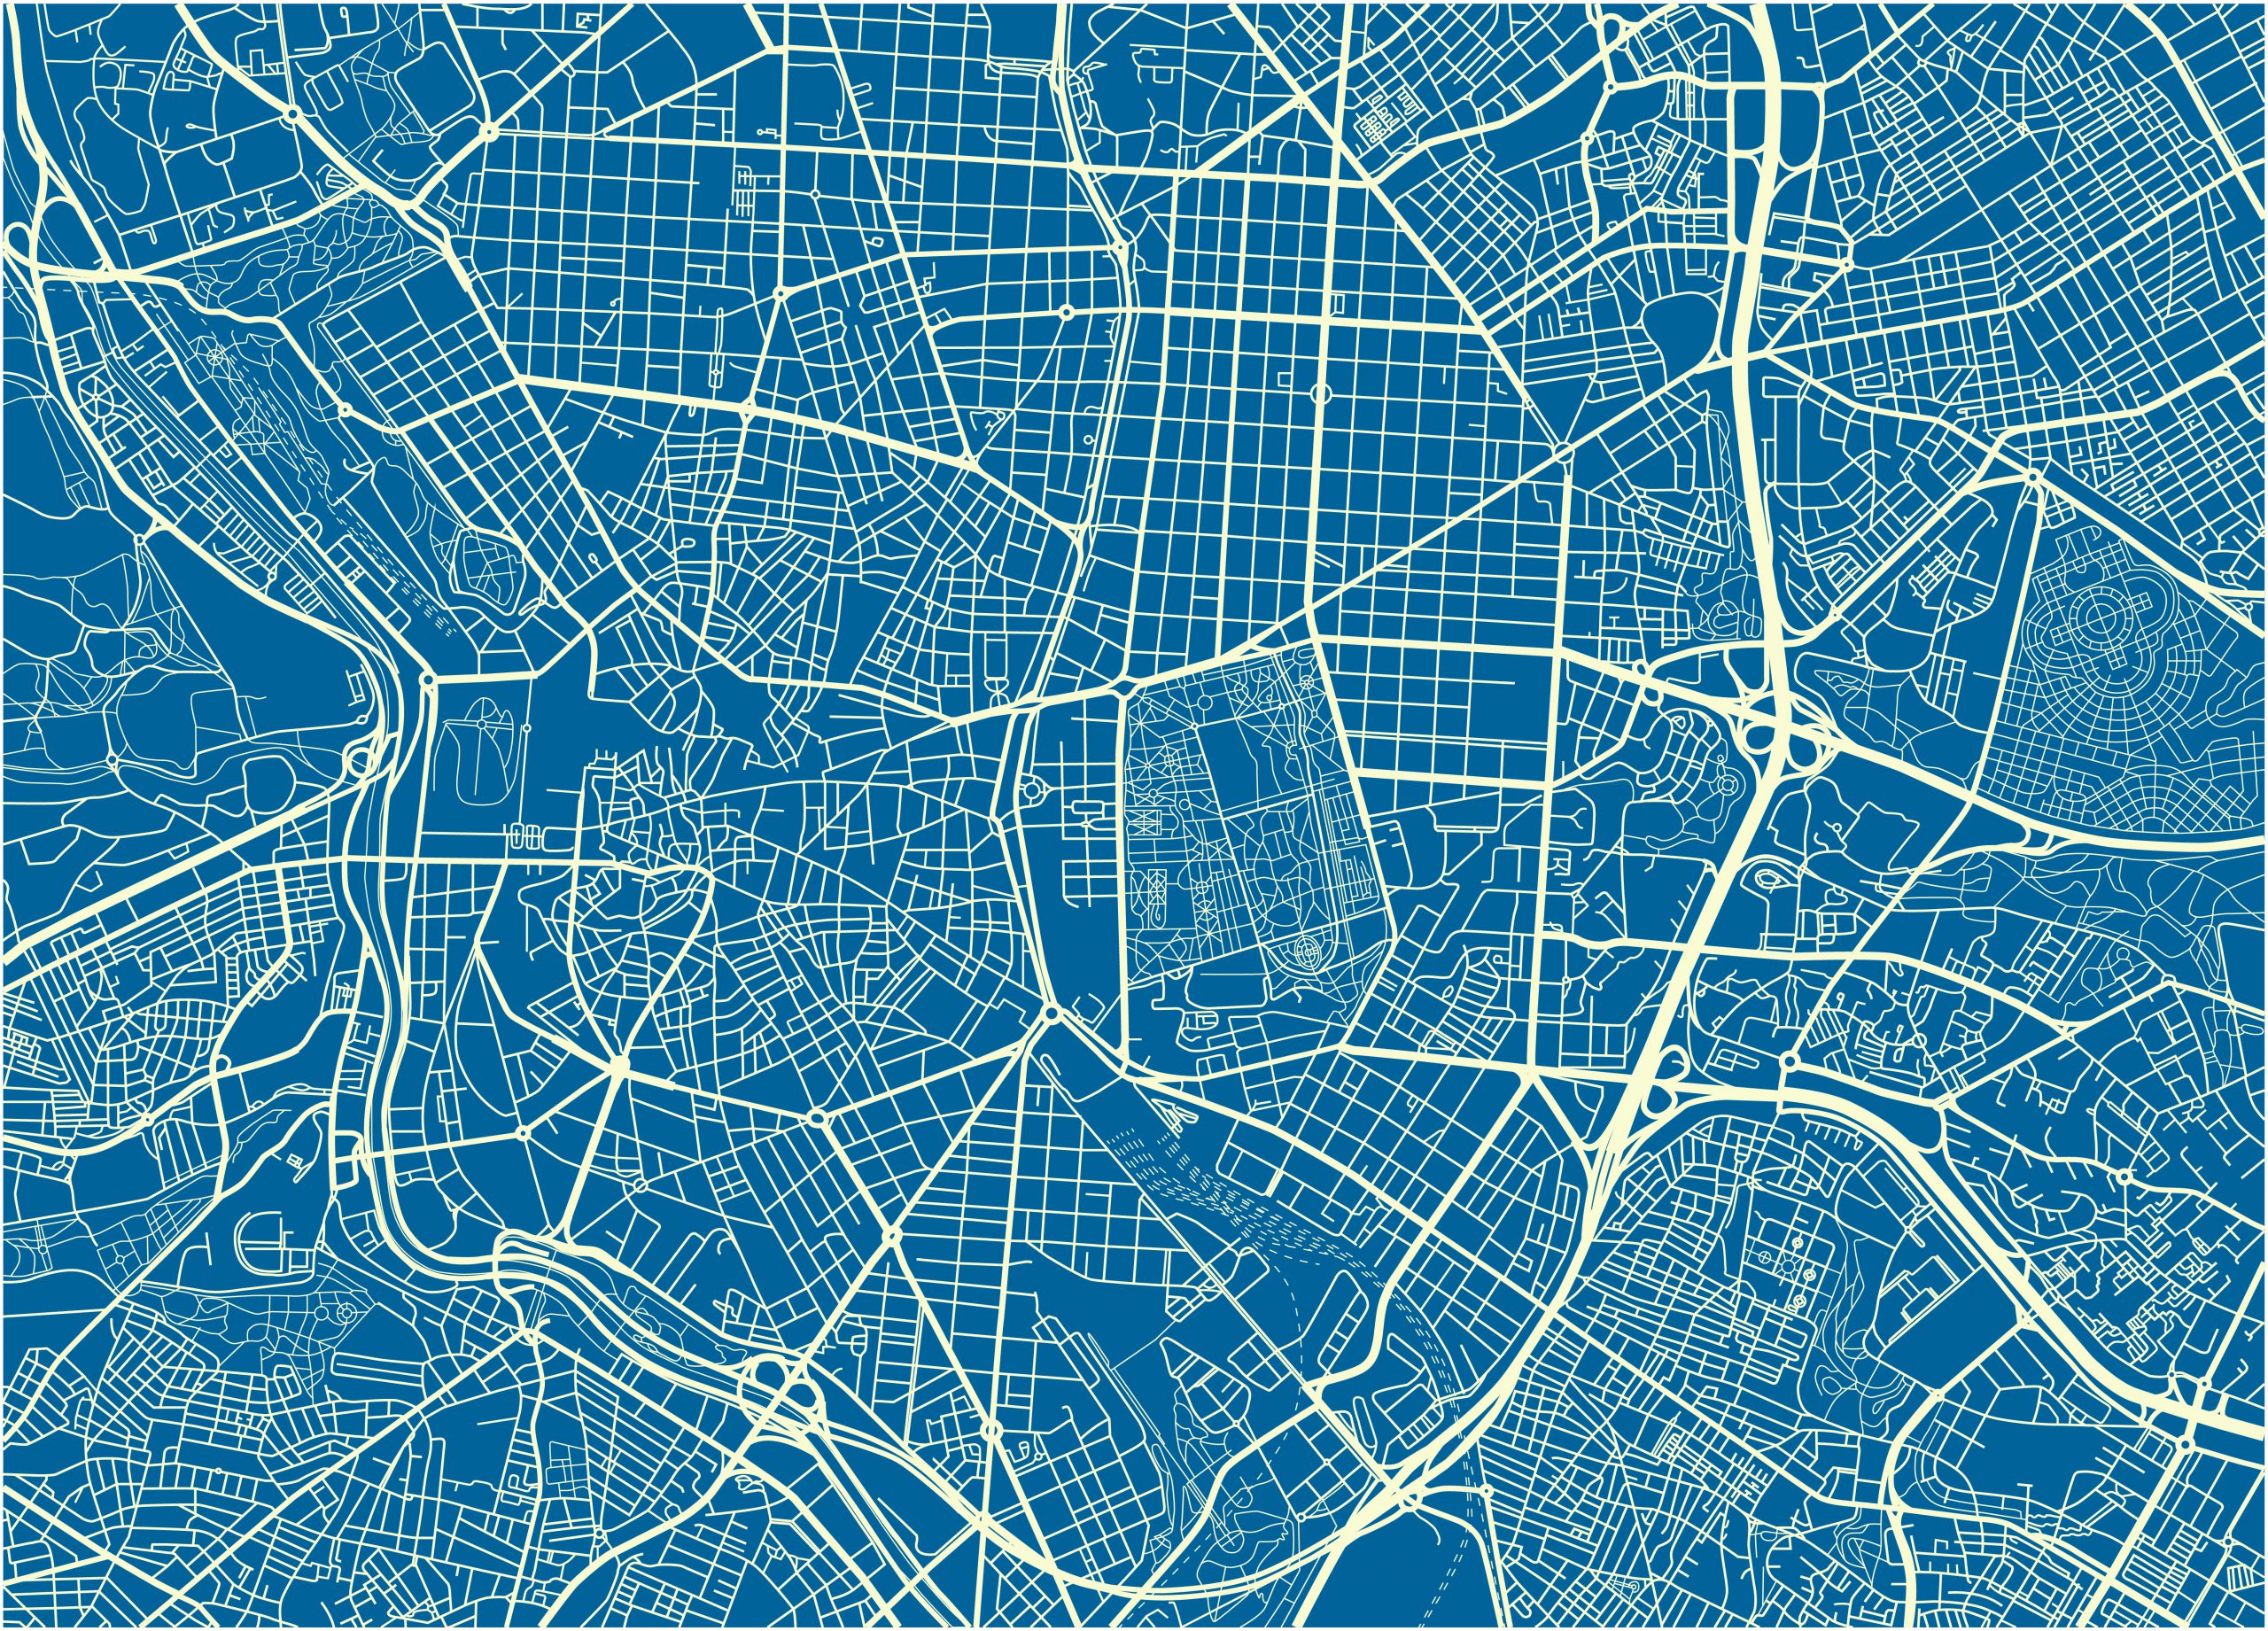 Blue map with light blue roads